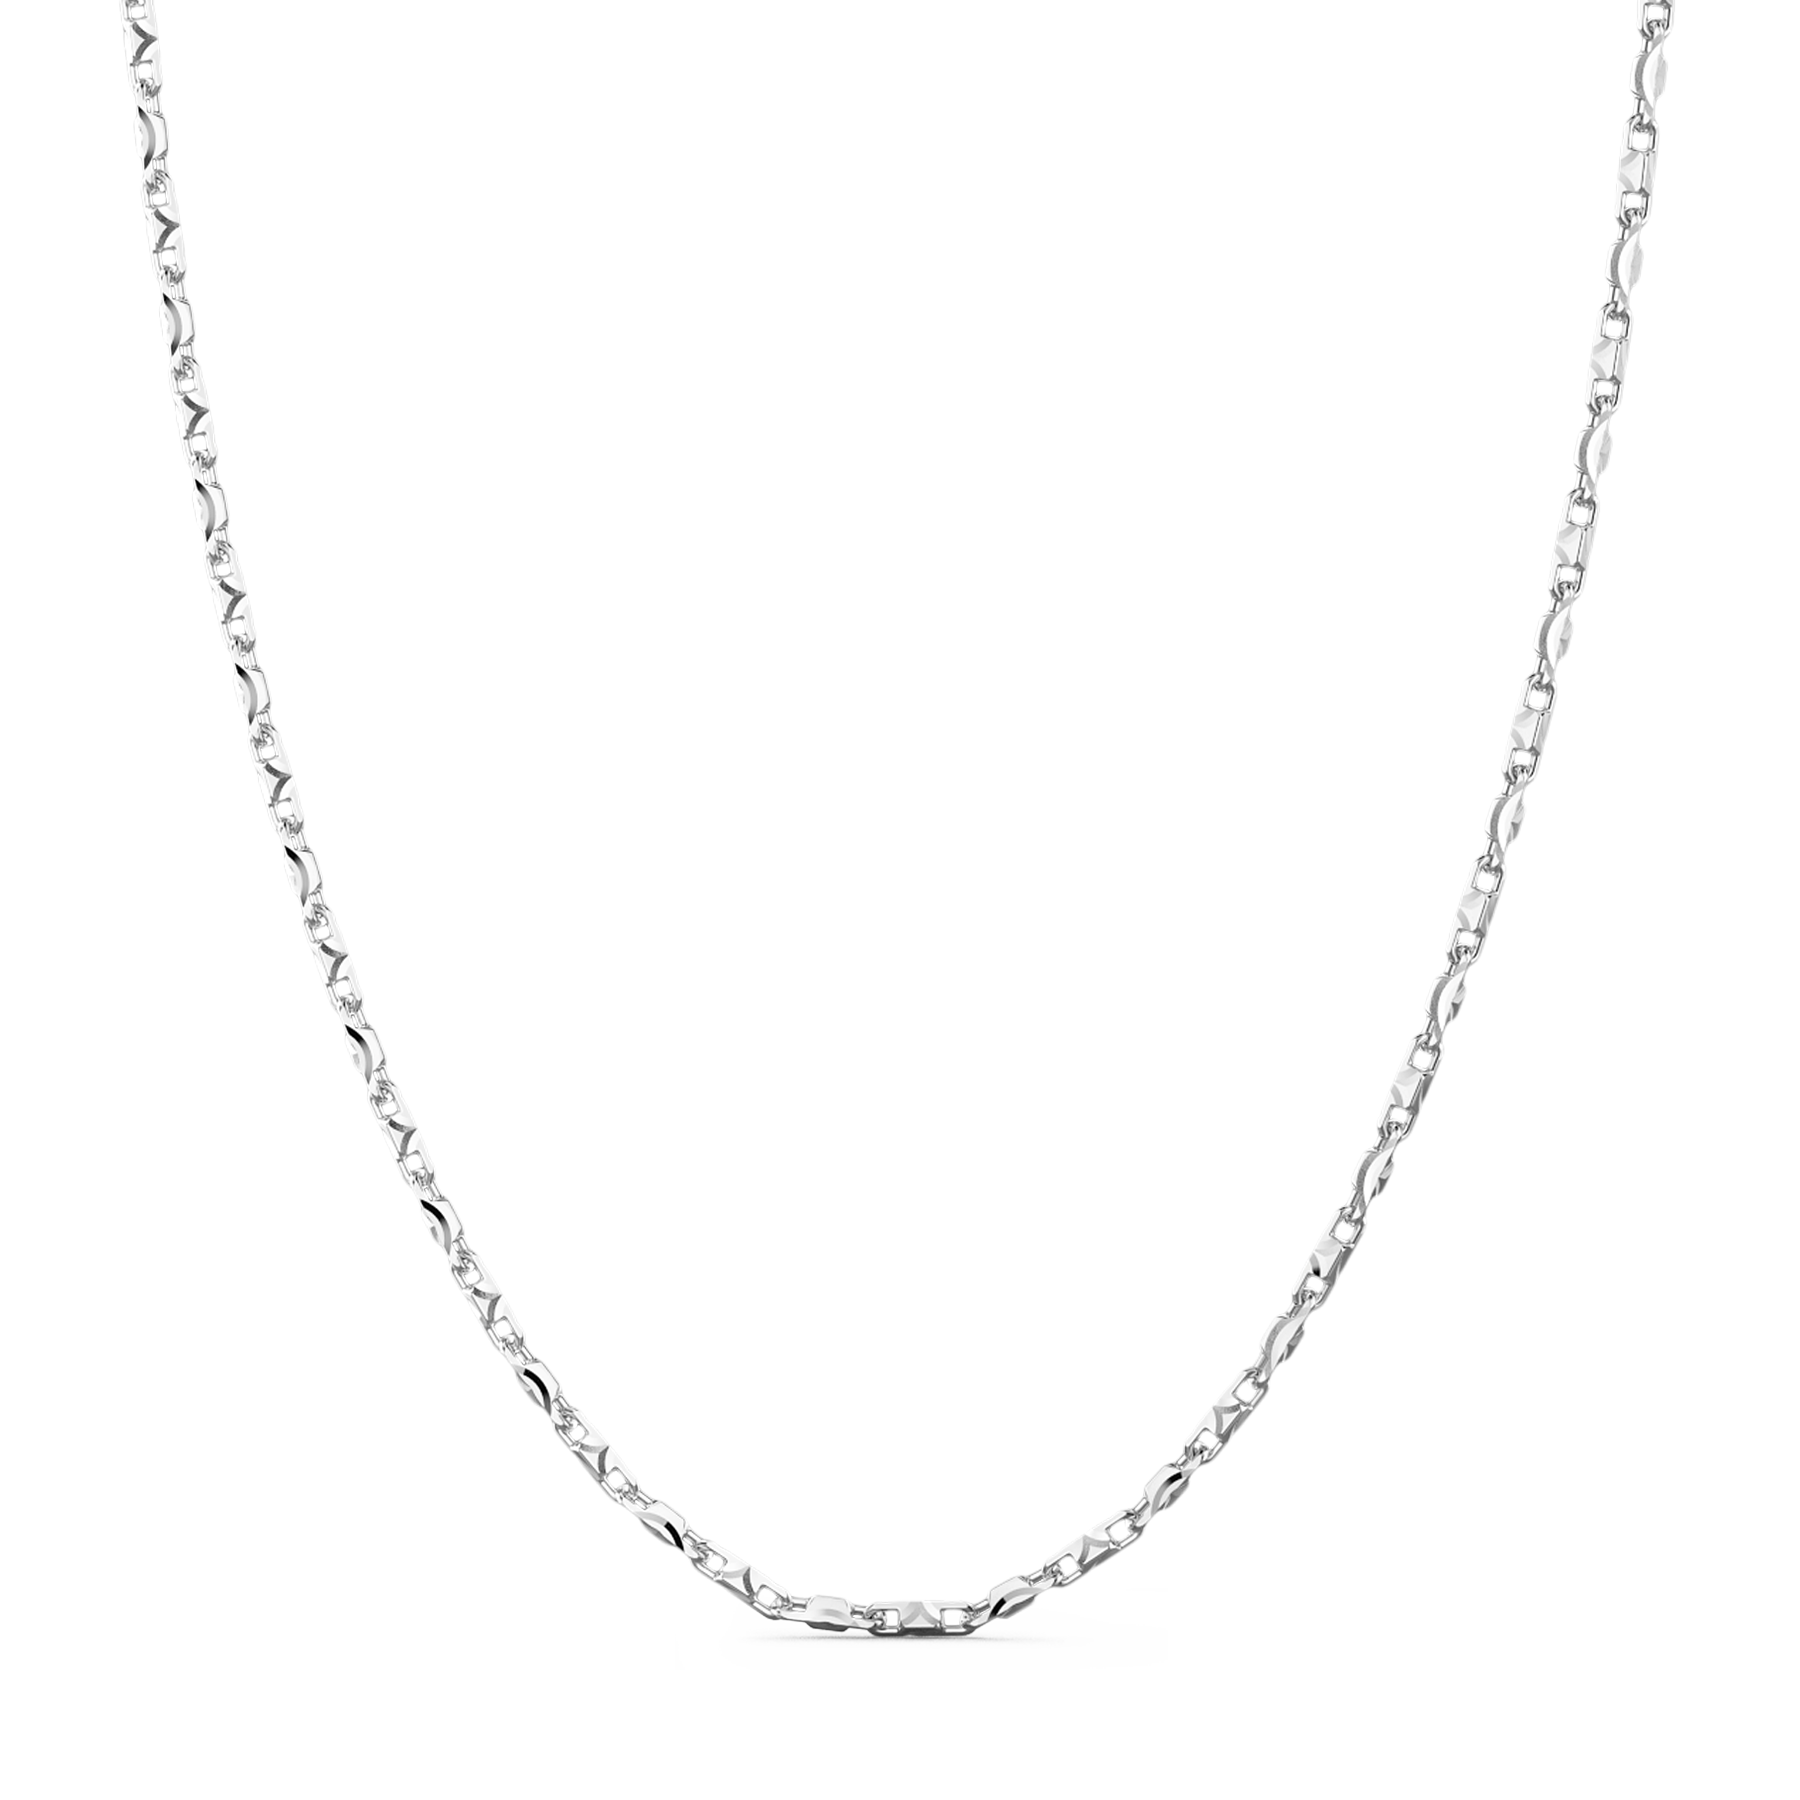 Crafted in Italy, this Zancan Sterling Silver Geometrical Link Chain Necklace showcases expert design and quality. Made with 925 sterling silver and rhodium coated for durability, this 22" long chain features a secure lobster catch. Elevate your style with this sleek and sophisticated men's necklace.